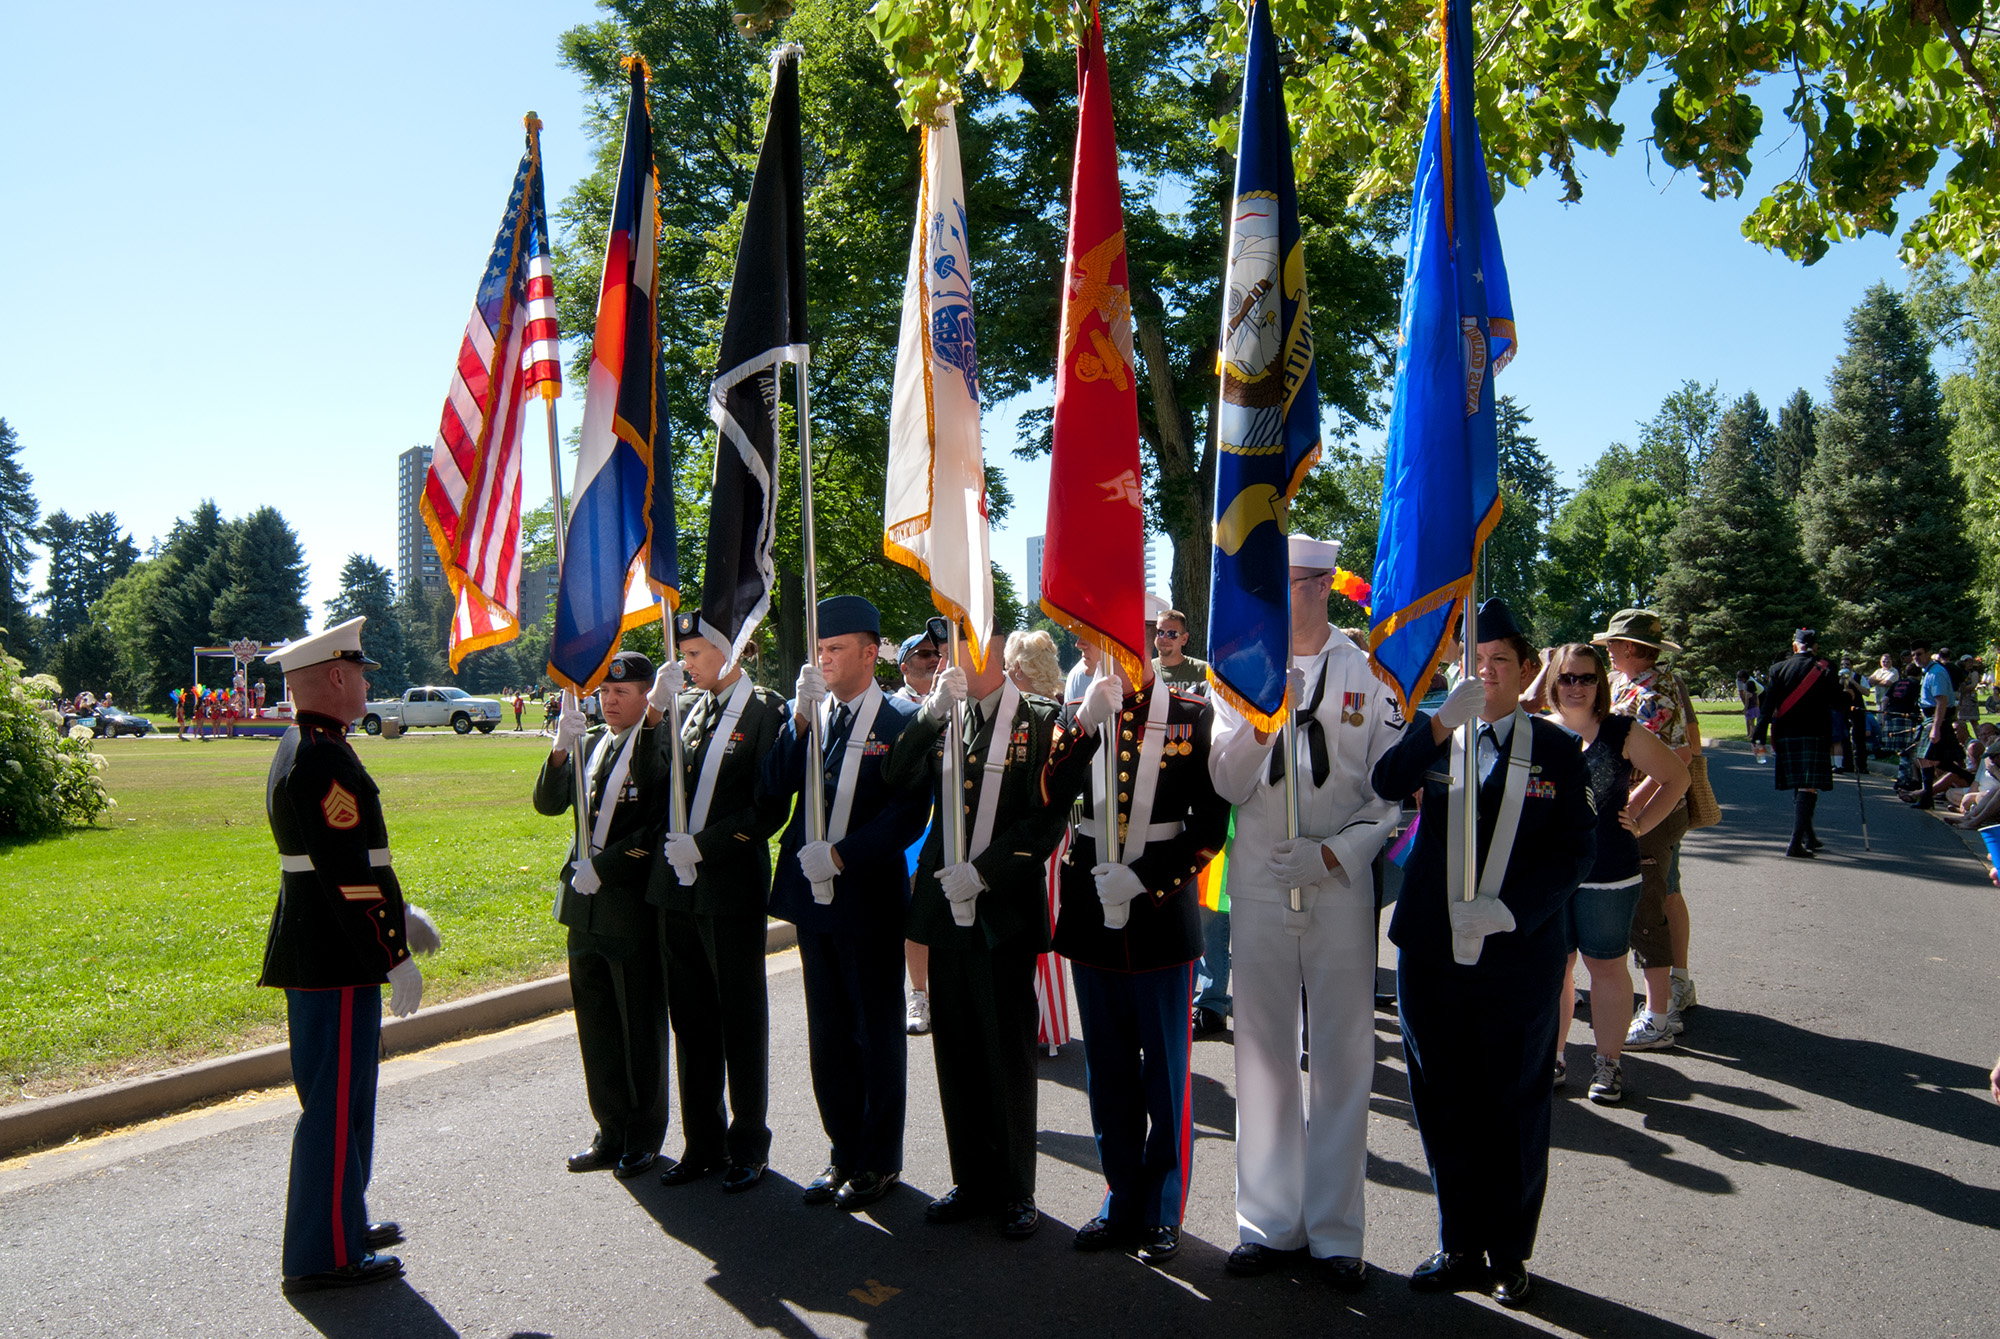 The American Veterans for Equal Rights, Rocky Mountain Chapter, sponsors the Colorado LGBT Community Color Guard, the nations first and only regulation LGBT color guard. Active, reserve, and veteran members of the Army, Navy, Marine Corps, and Air Force make up the guard.